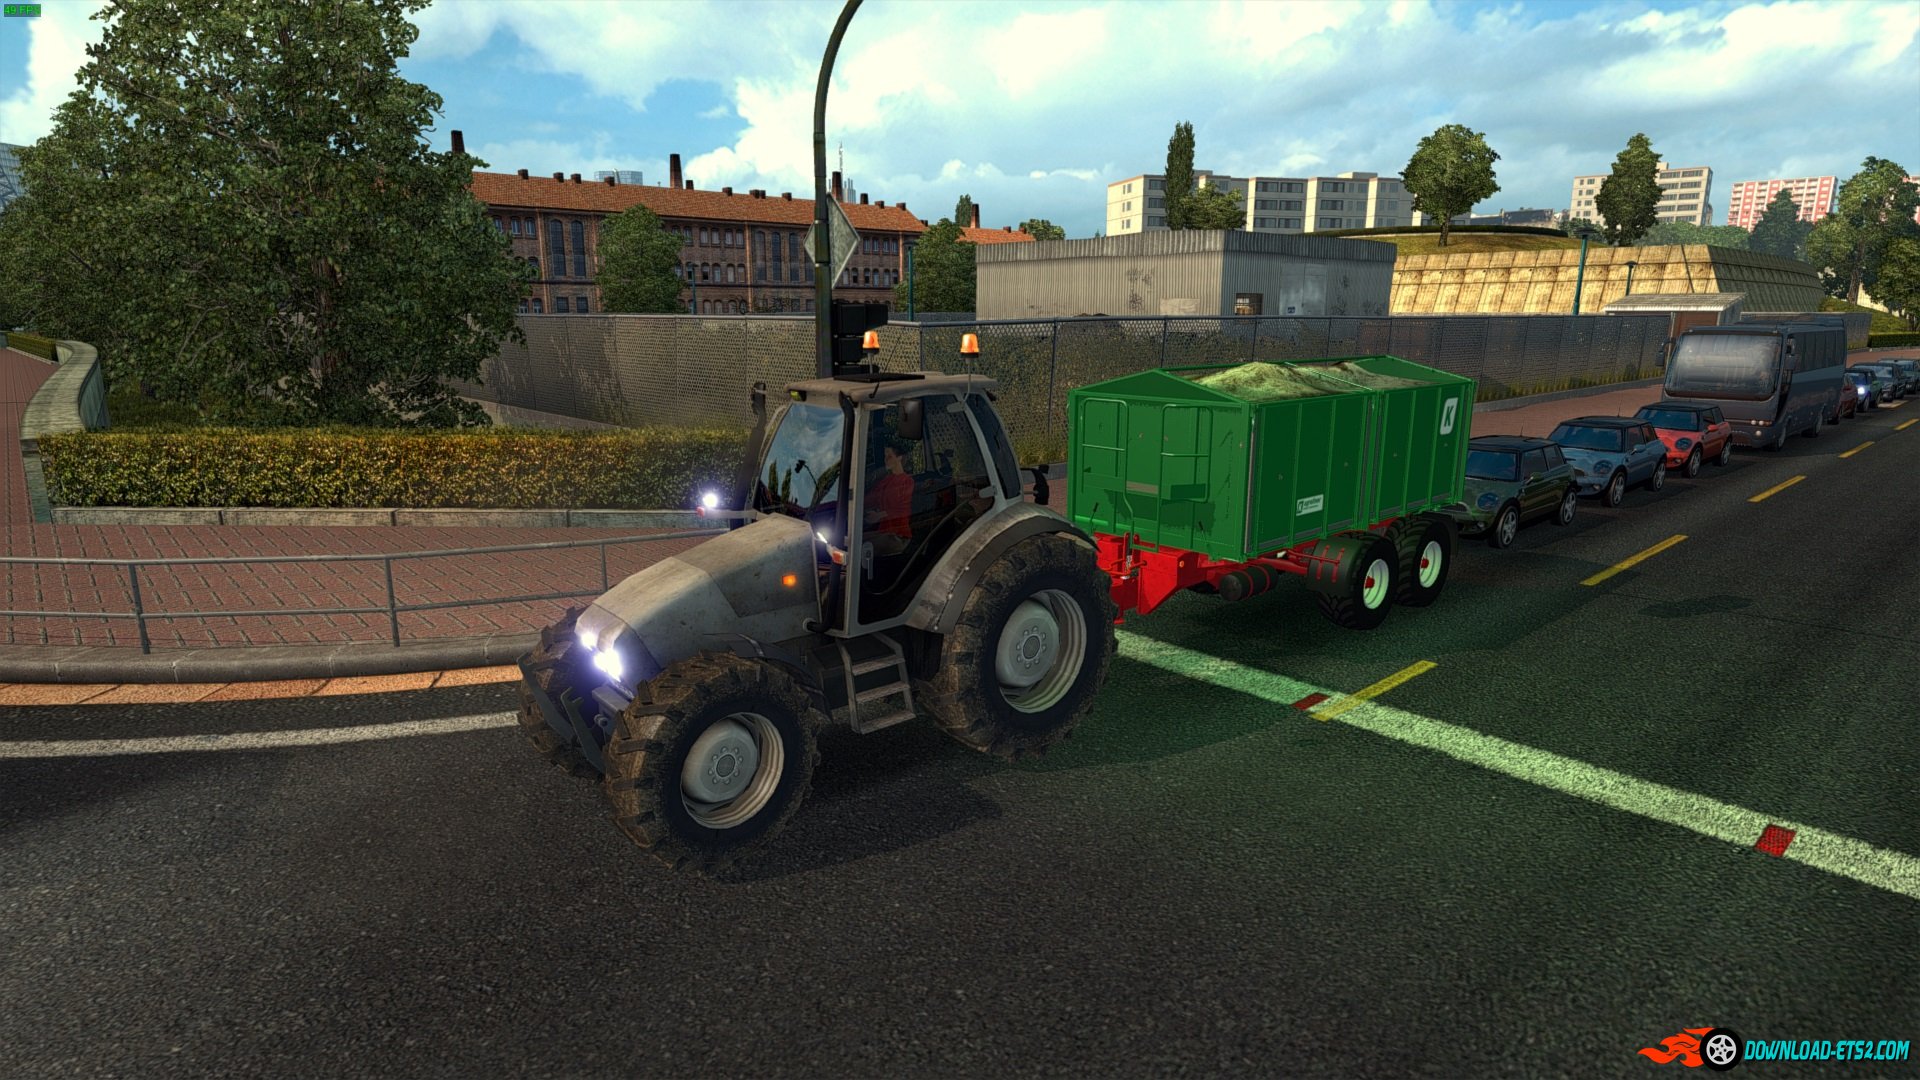 Tractor Trailer Simulation Games